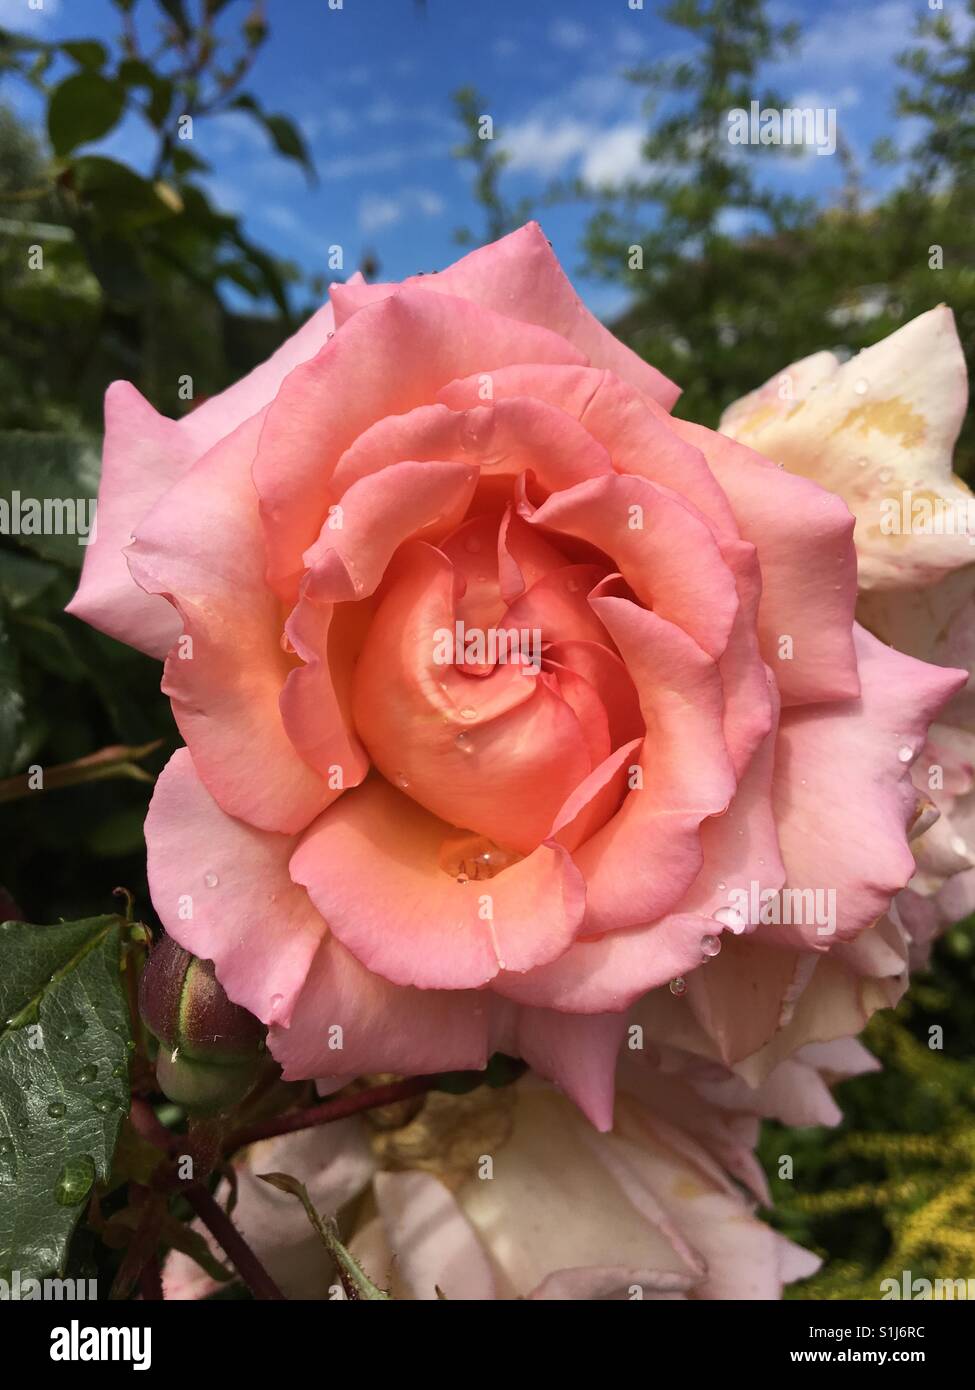 Apricot/pink traditional rose, variety 'Compassion' Stock Photo